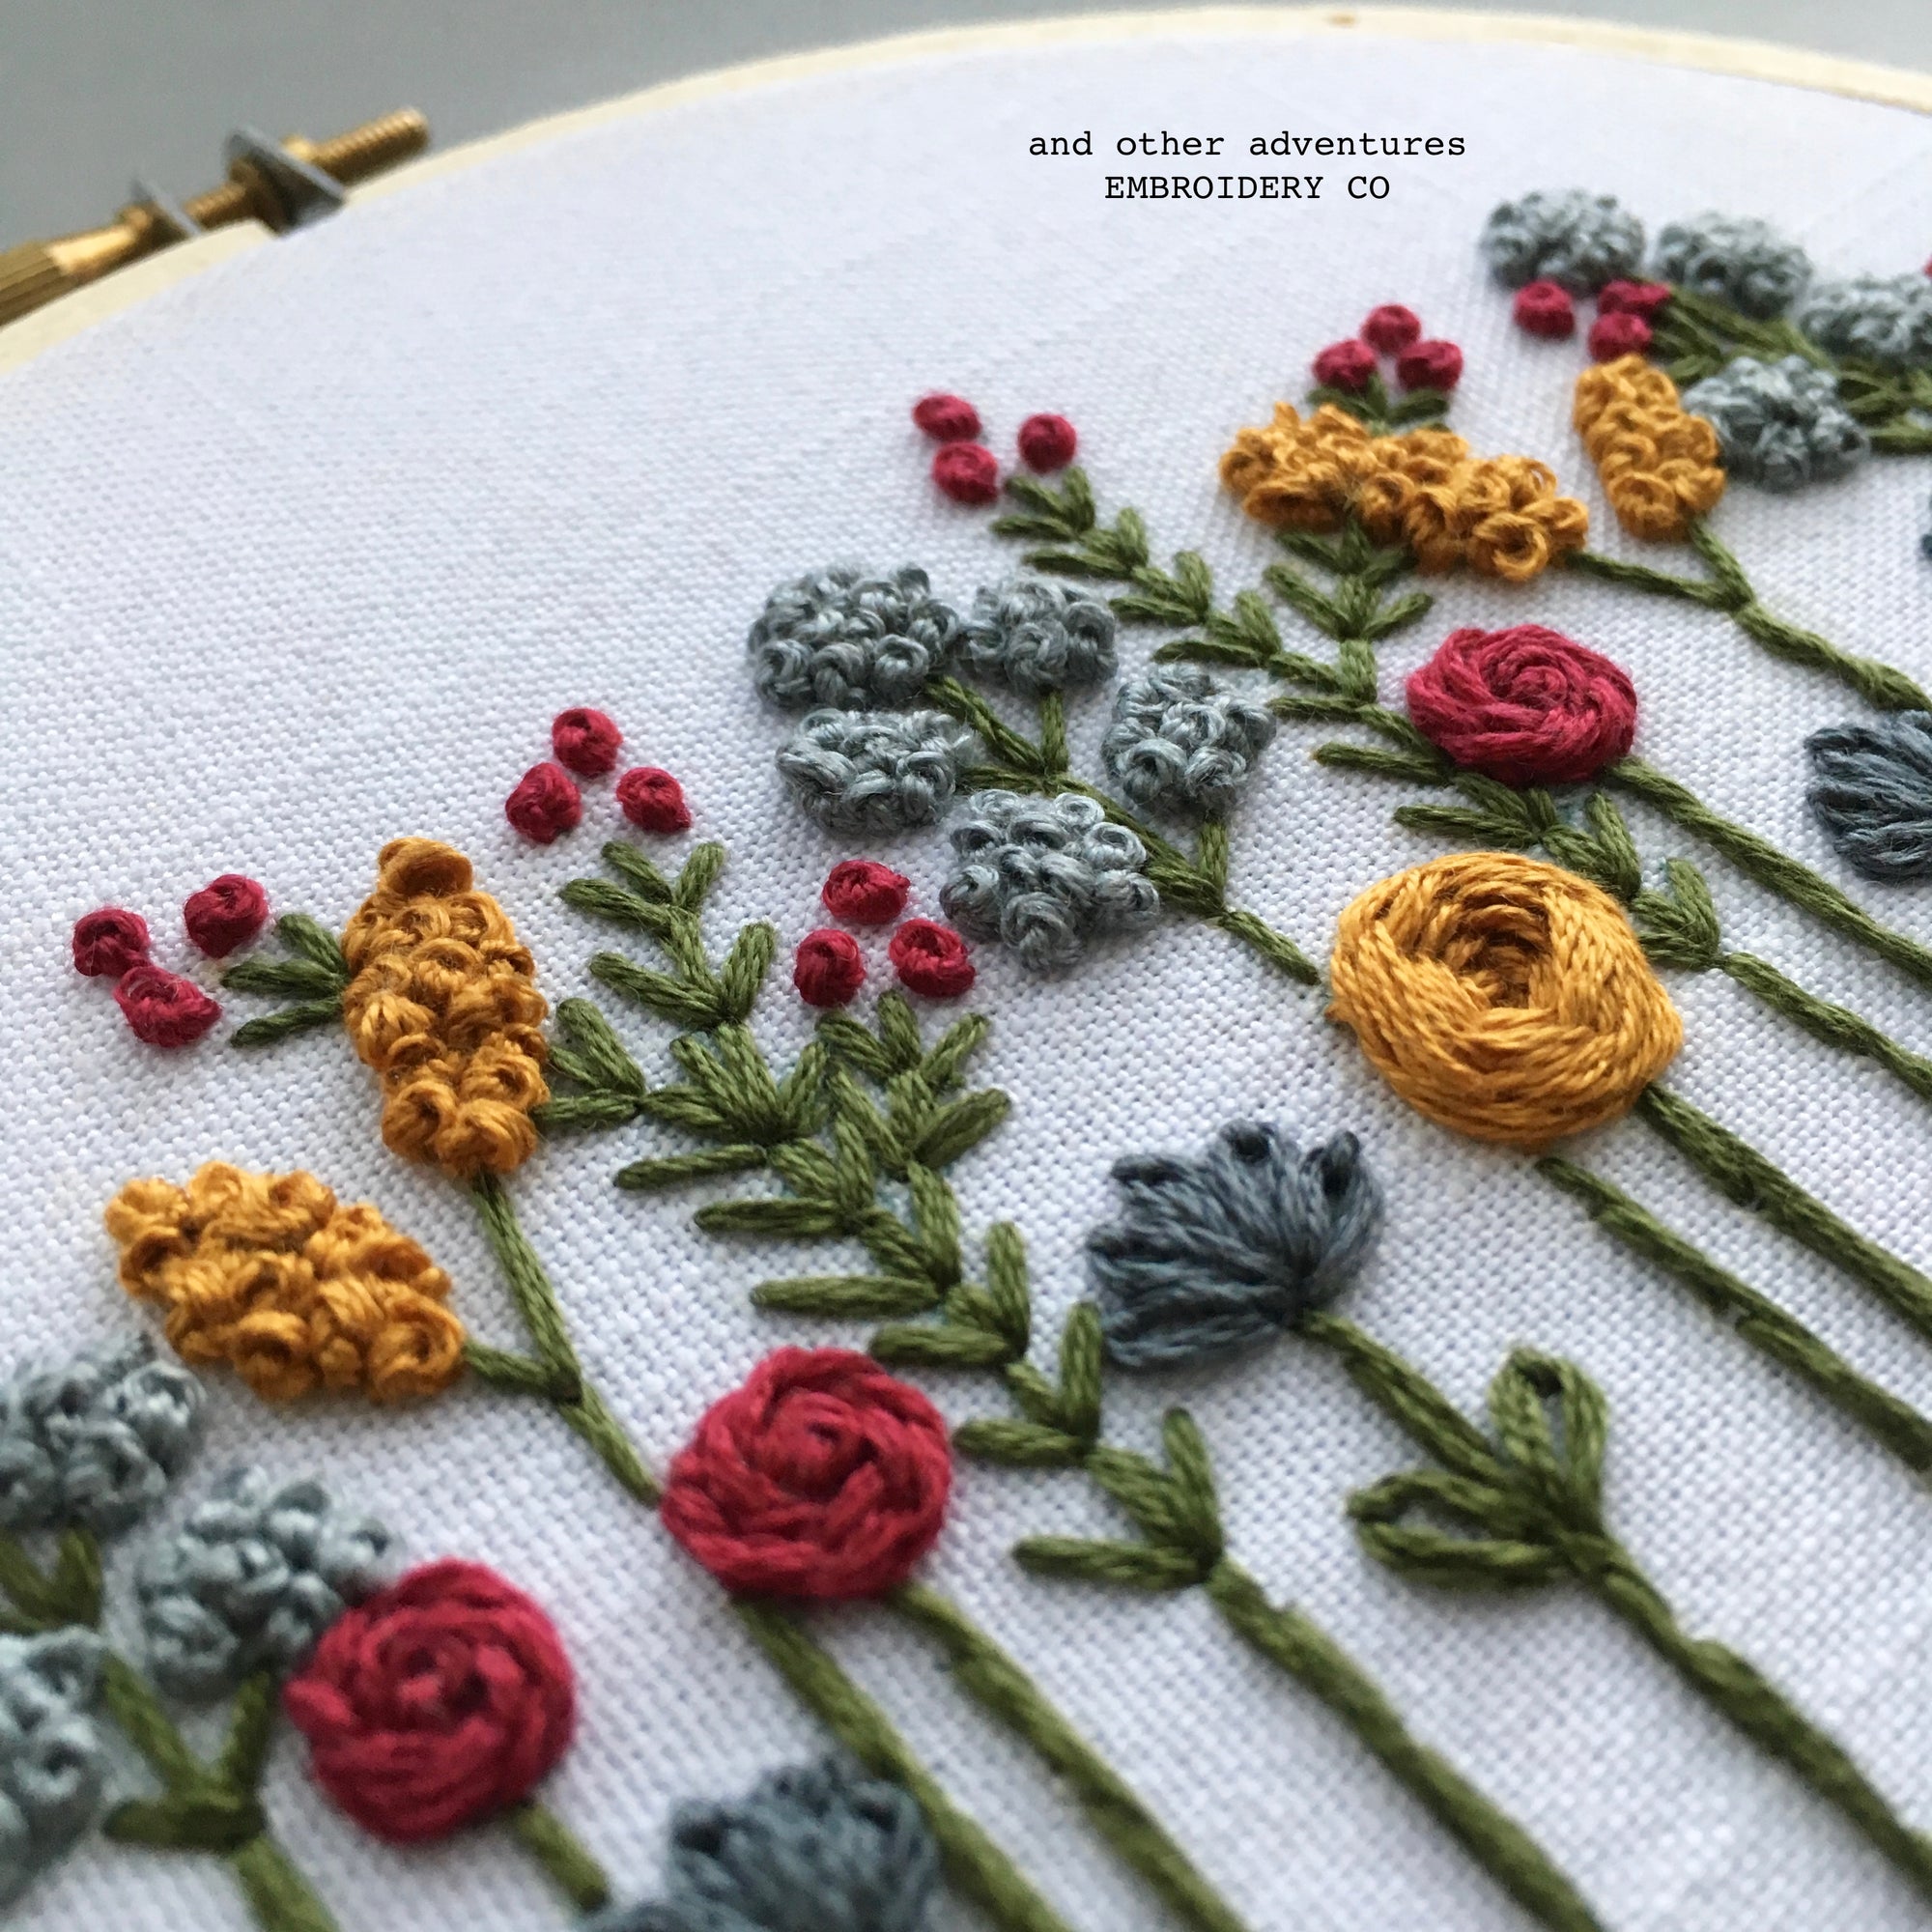 Floral Embroidery Hoop Art - And Other Adventures Embroidery Co